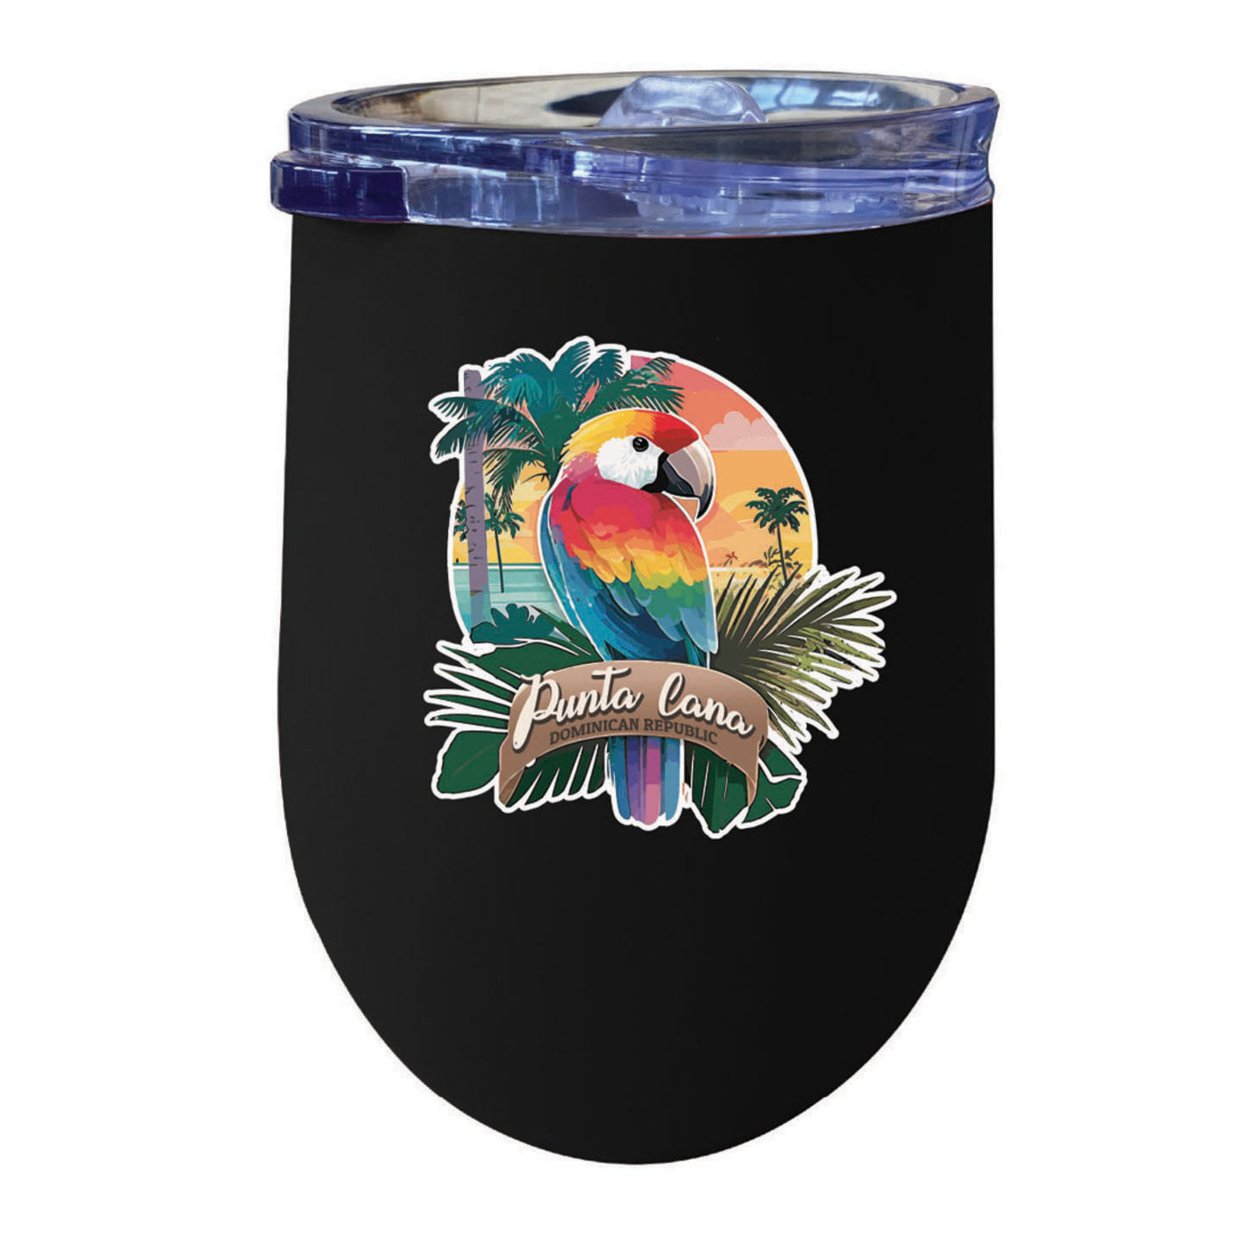 Punta Cana Dominican Republic Souvenir 12 Oz Insulated Wine Stainless Steel Tumbler - Black, PARROT